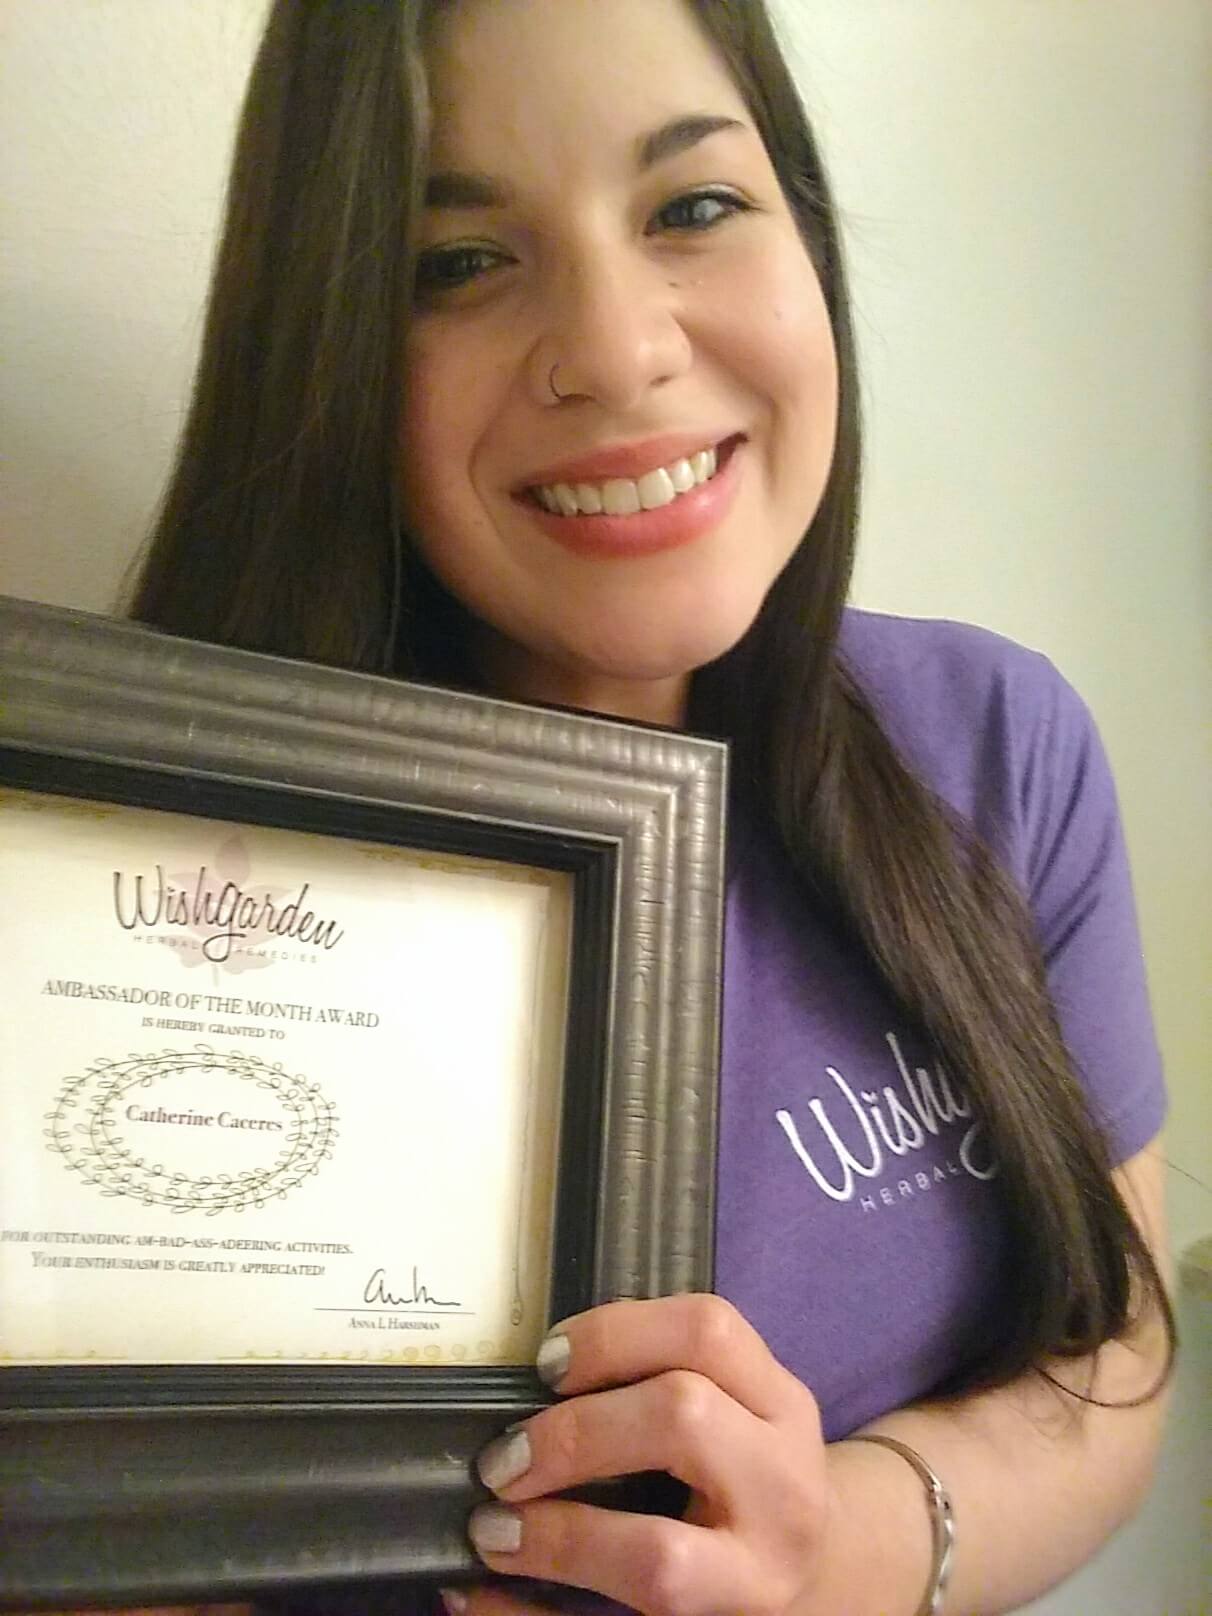 An Interview With Catherine Caceres, WishGarden Ambassador Of The Month